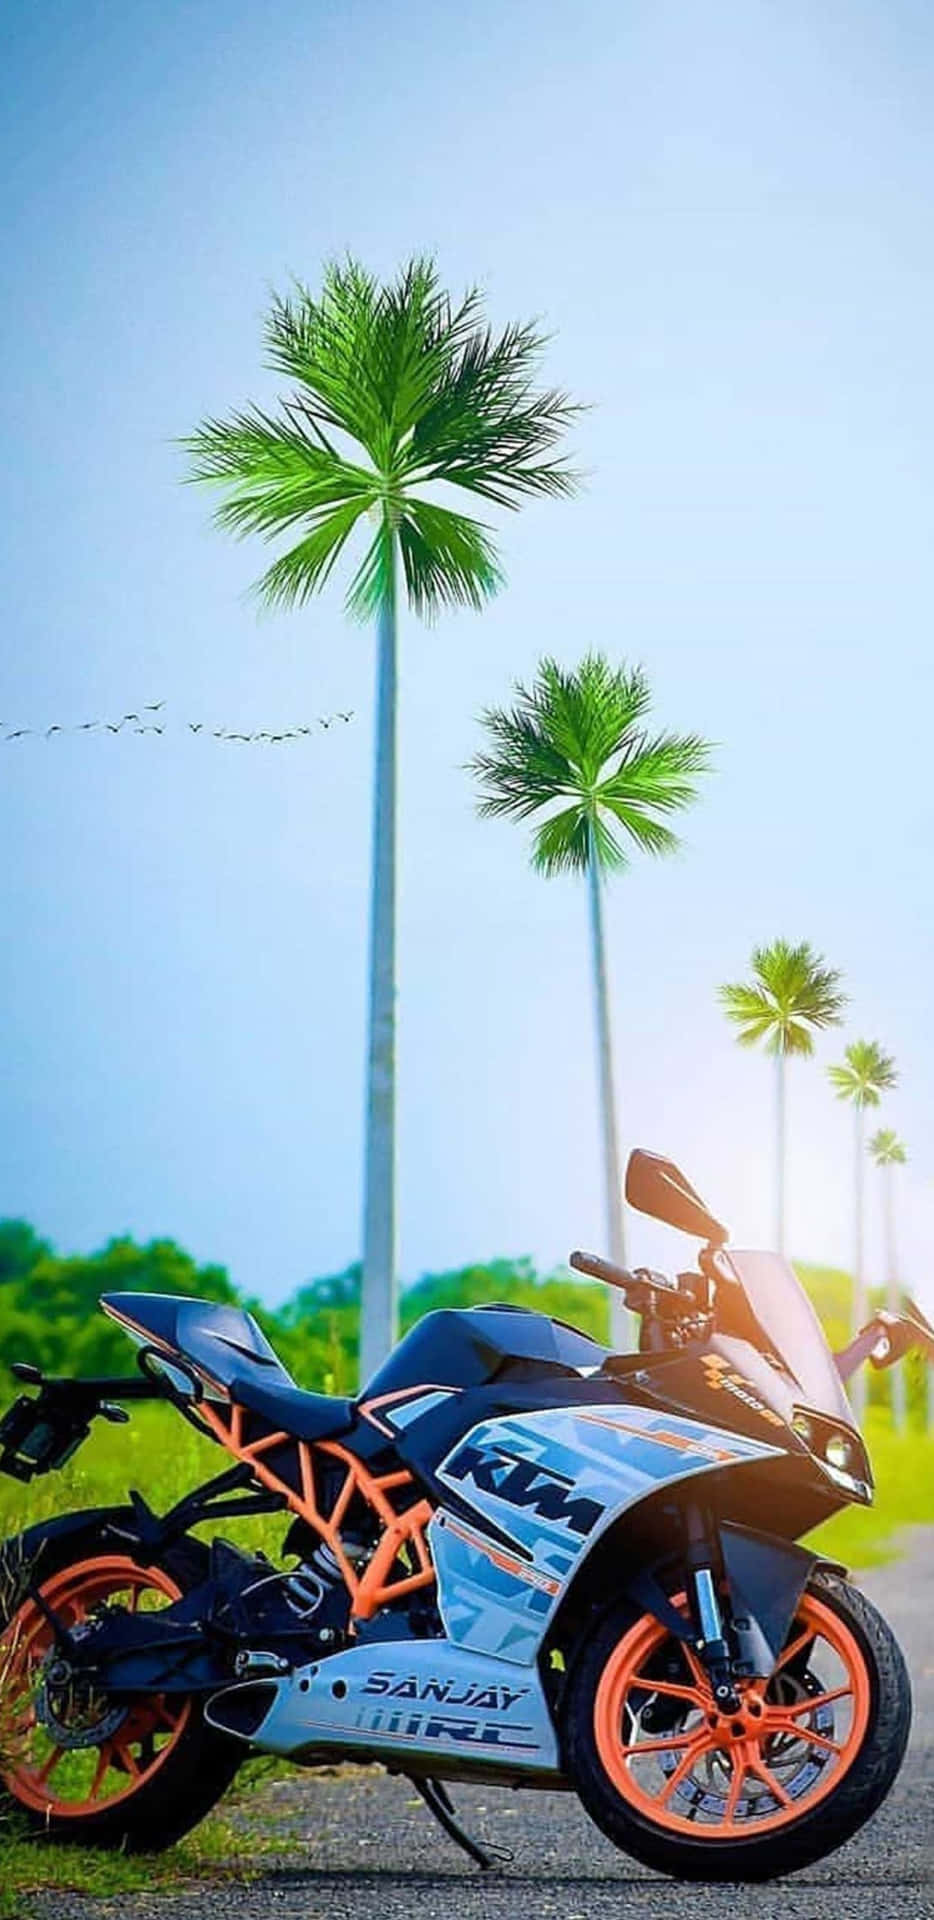 A Motorcycle Parked On A Road With Palm Trees